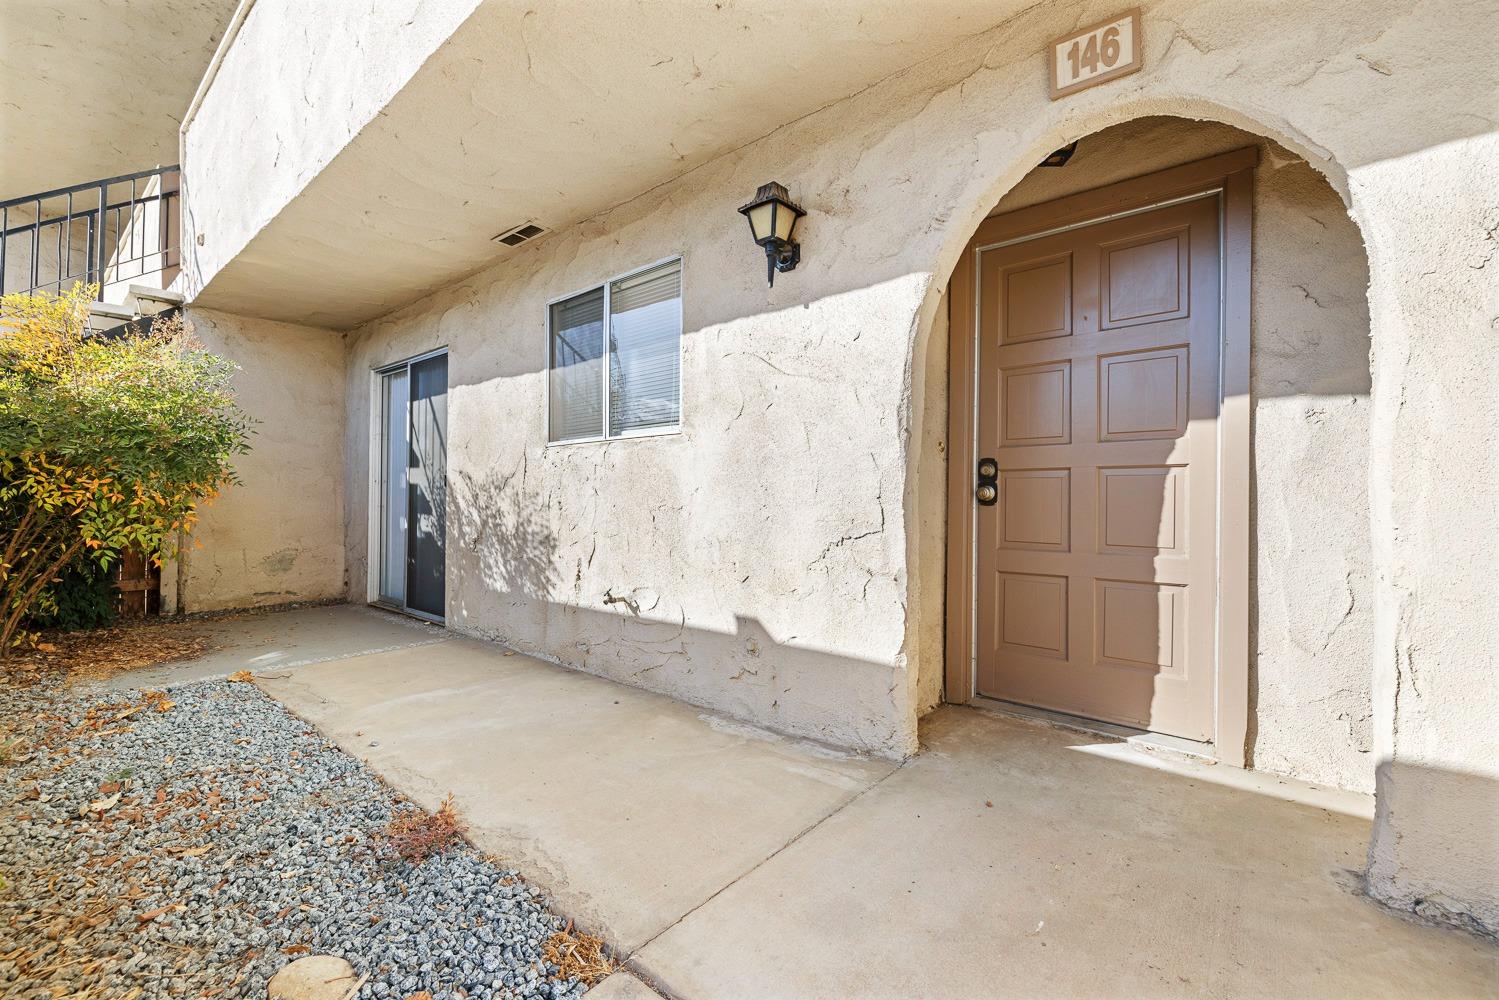 Photo of 1250 E Shaw Ave #146 in Fresno, CA